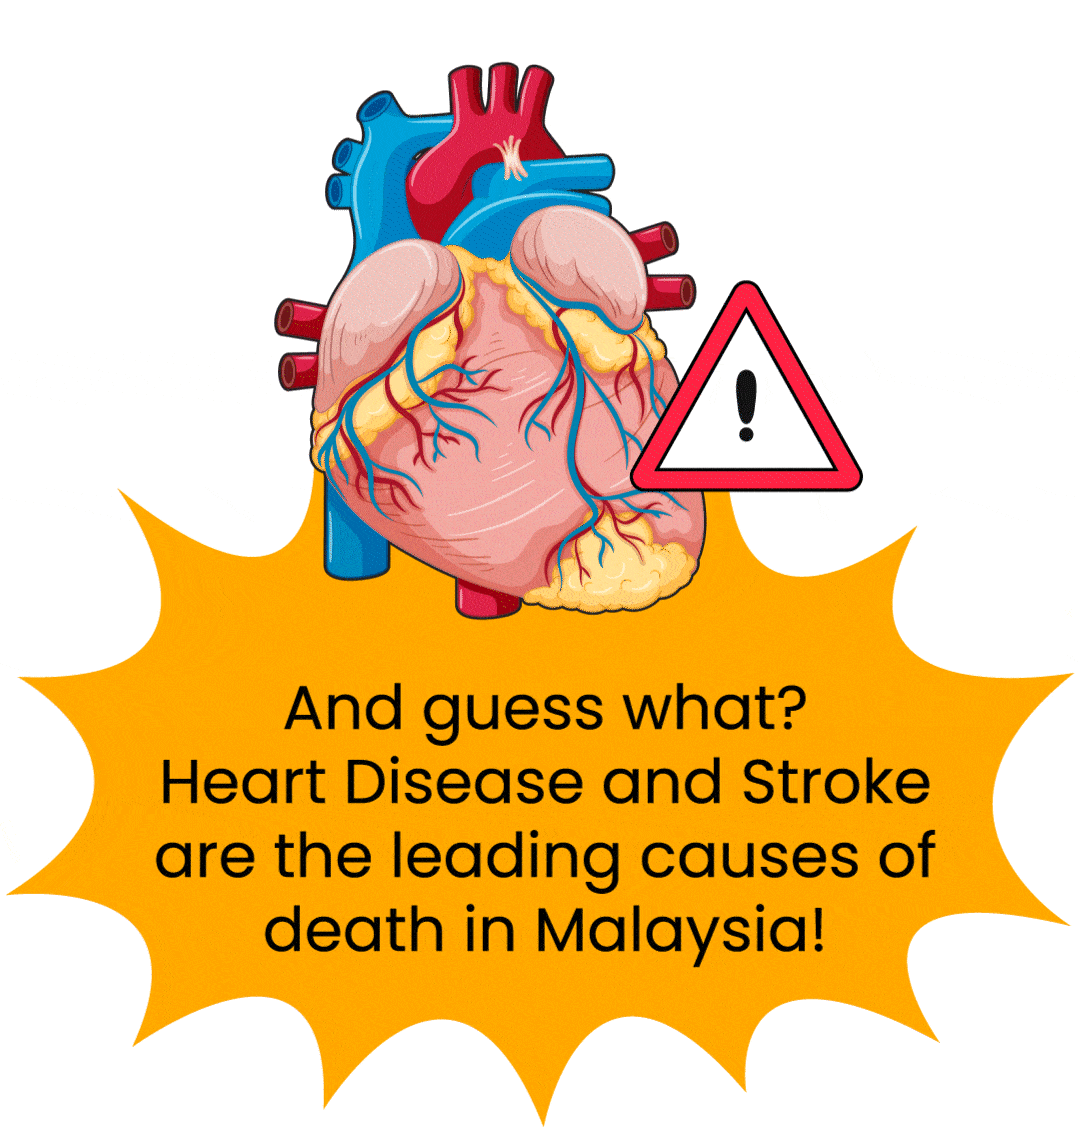 Heart disease and stroke are the leading causes of death in Malaysia